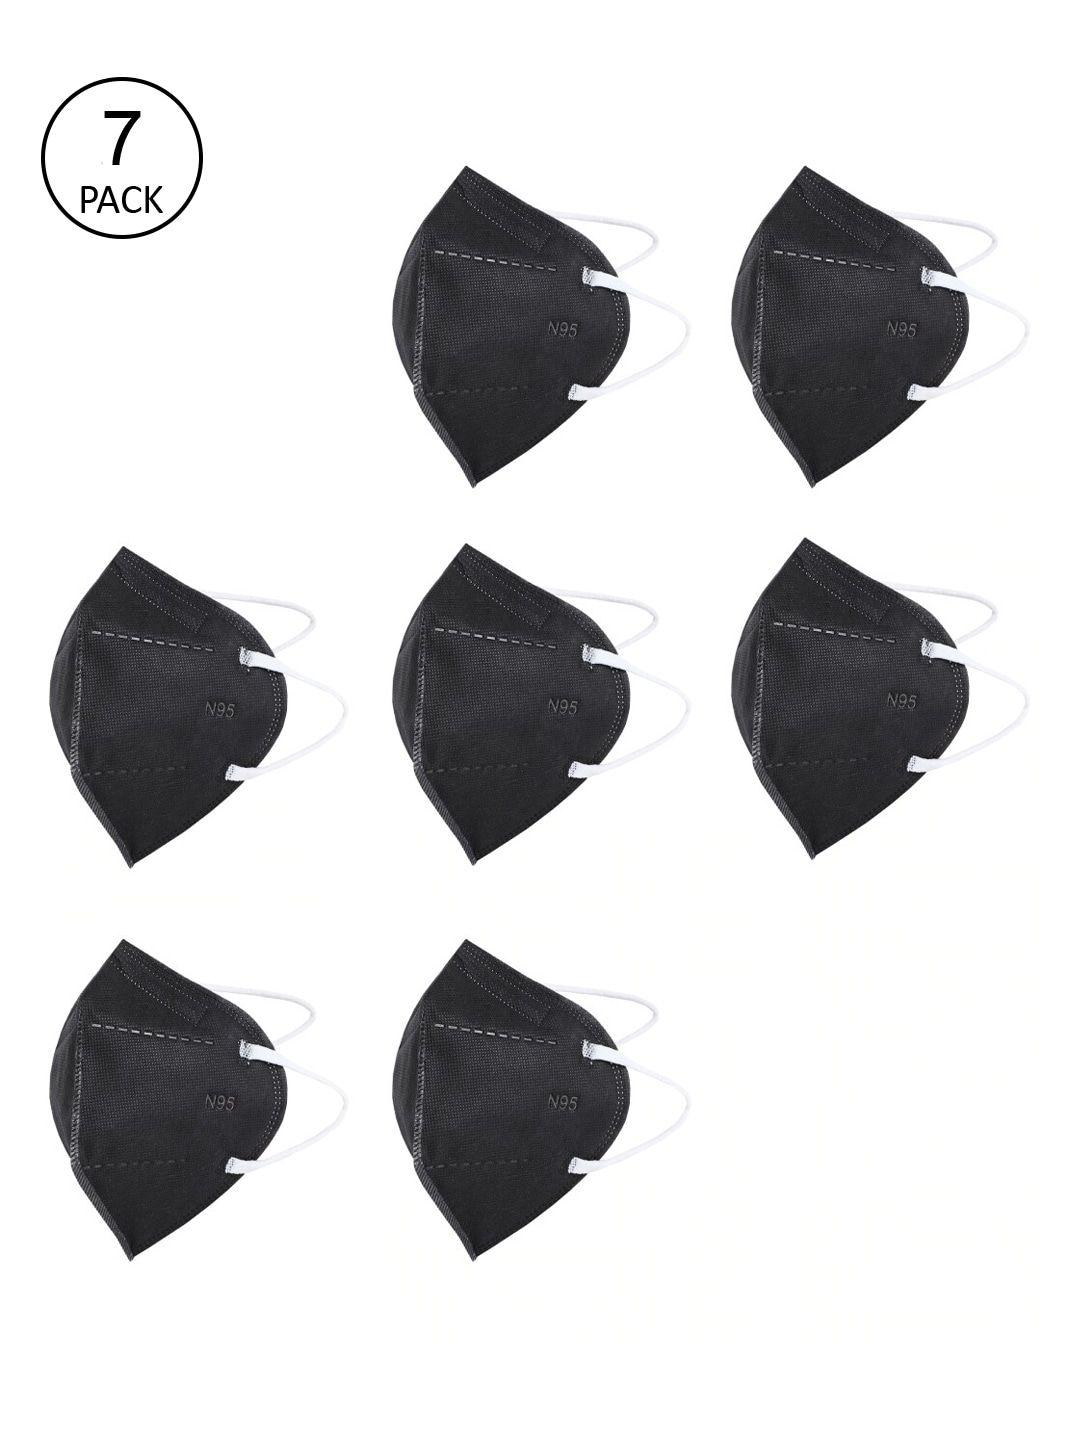 action-unisex-unisex-pack-of-7-black-solid-5-ply-reusable-n95-masks